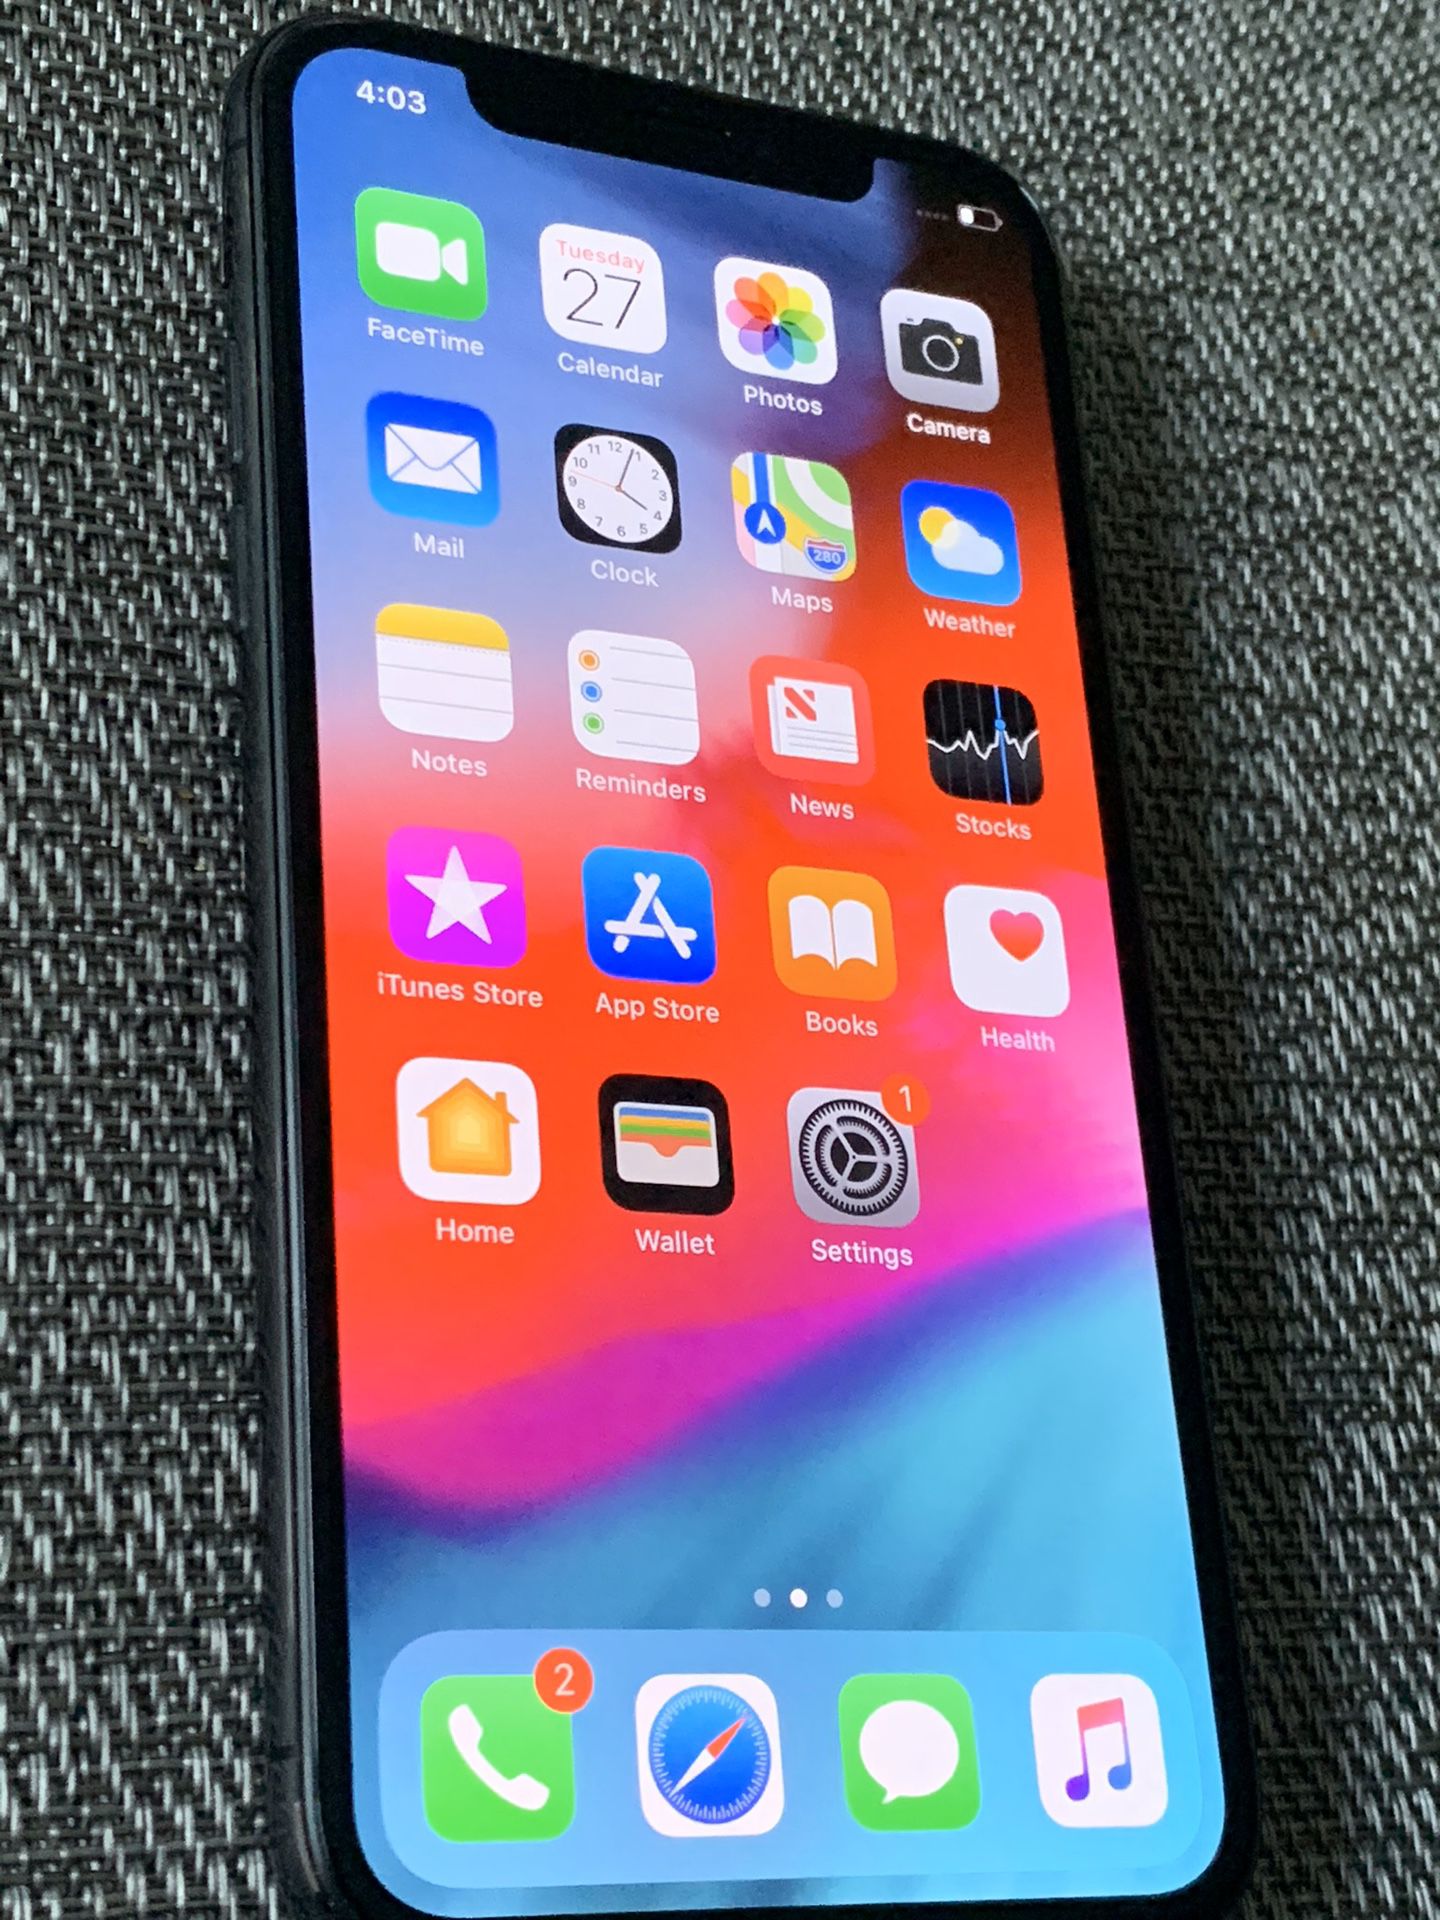 UNLOCKED IPHONE X 64GB CLEAN IMEI WITH EXTRAS